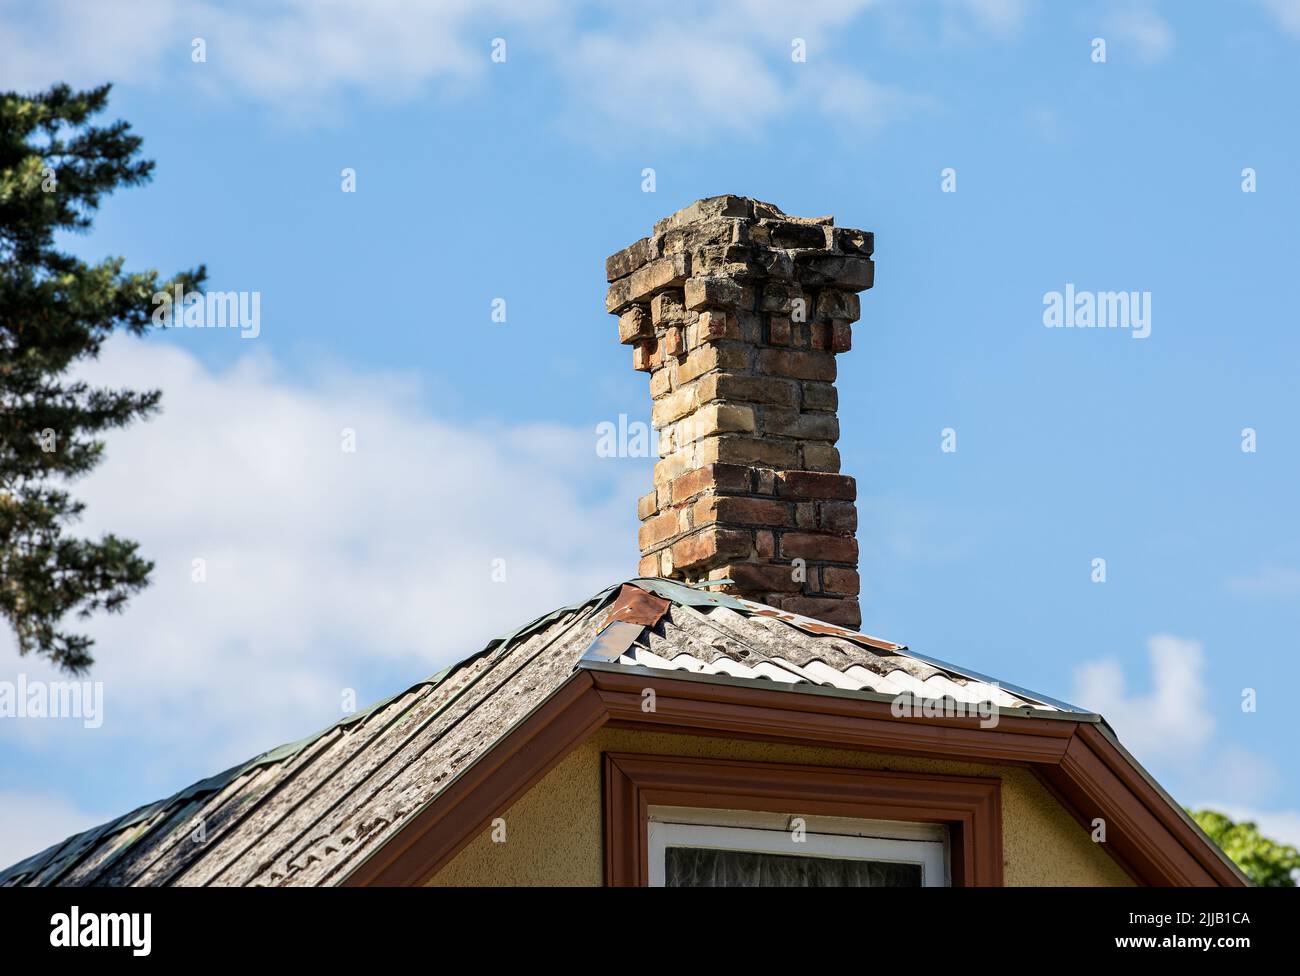 Old brick chimney on the edge of a roof. Heating and fire safety concept.. Stock Photo